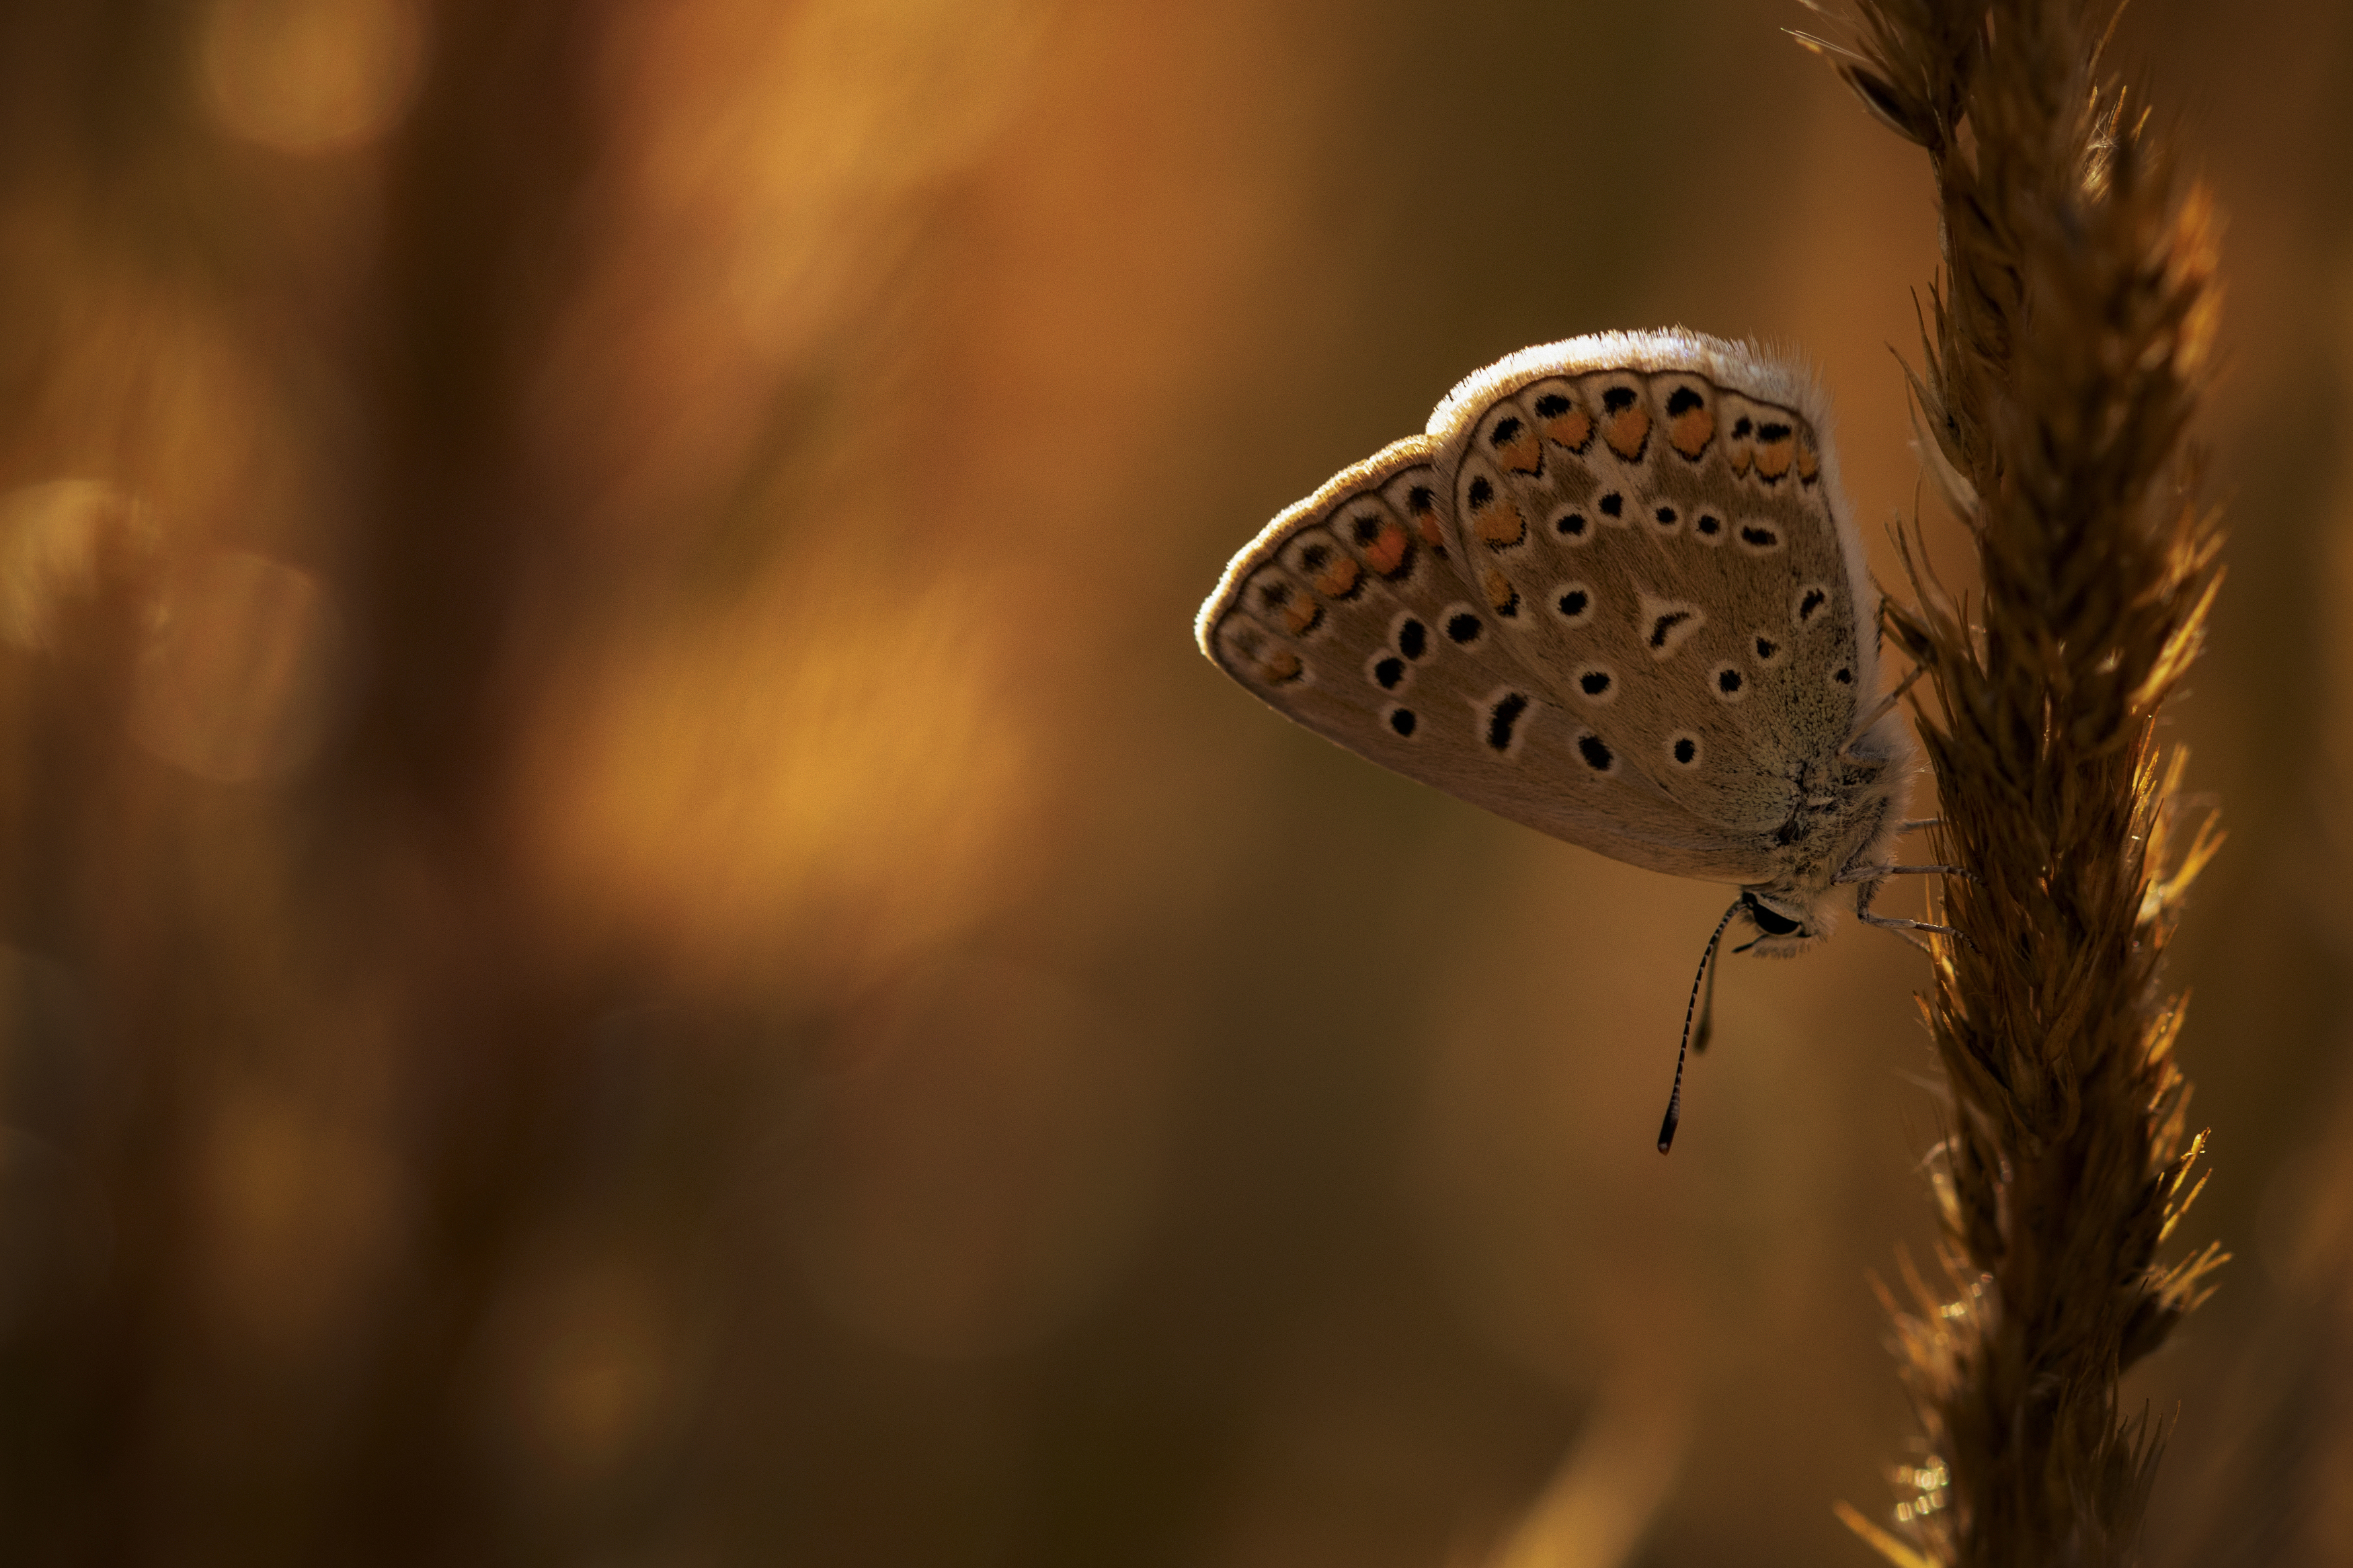 Wildlife, Insect, Close-up, Nature, Blue, Butterfly, Animal, Lycaenidae, Blue, buterfly, Gold, Bokeh, Macro, Damian Cyfka